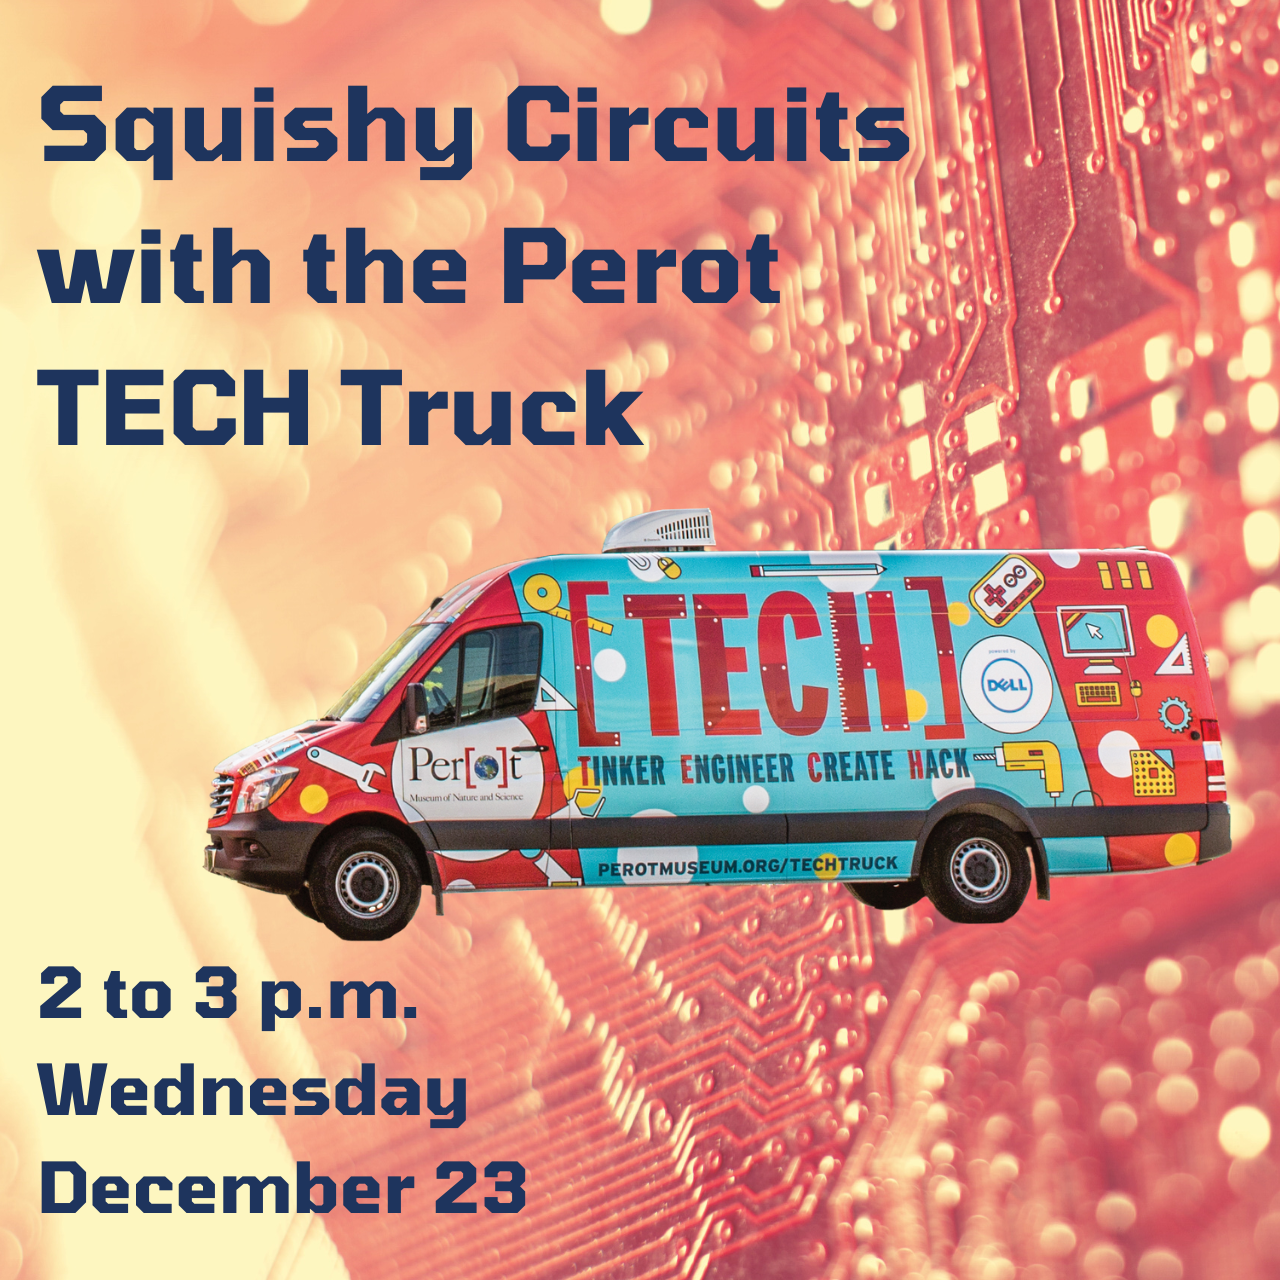 Squishy Circuits with the Perot TECH Truck